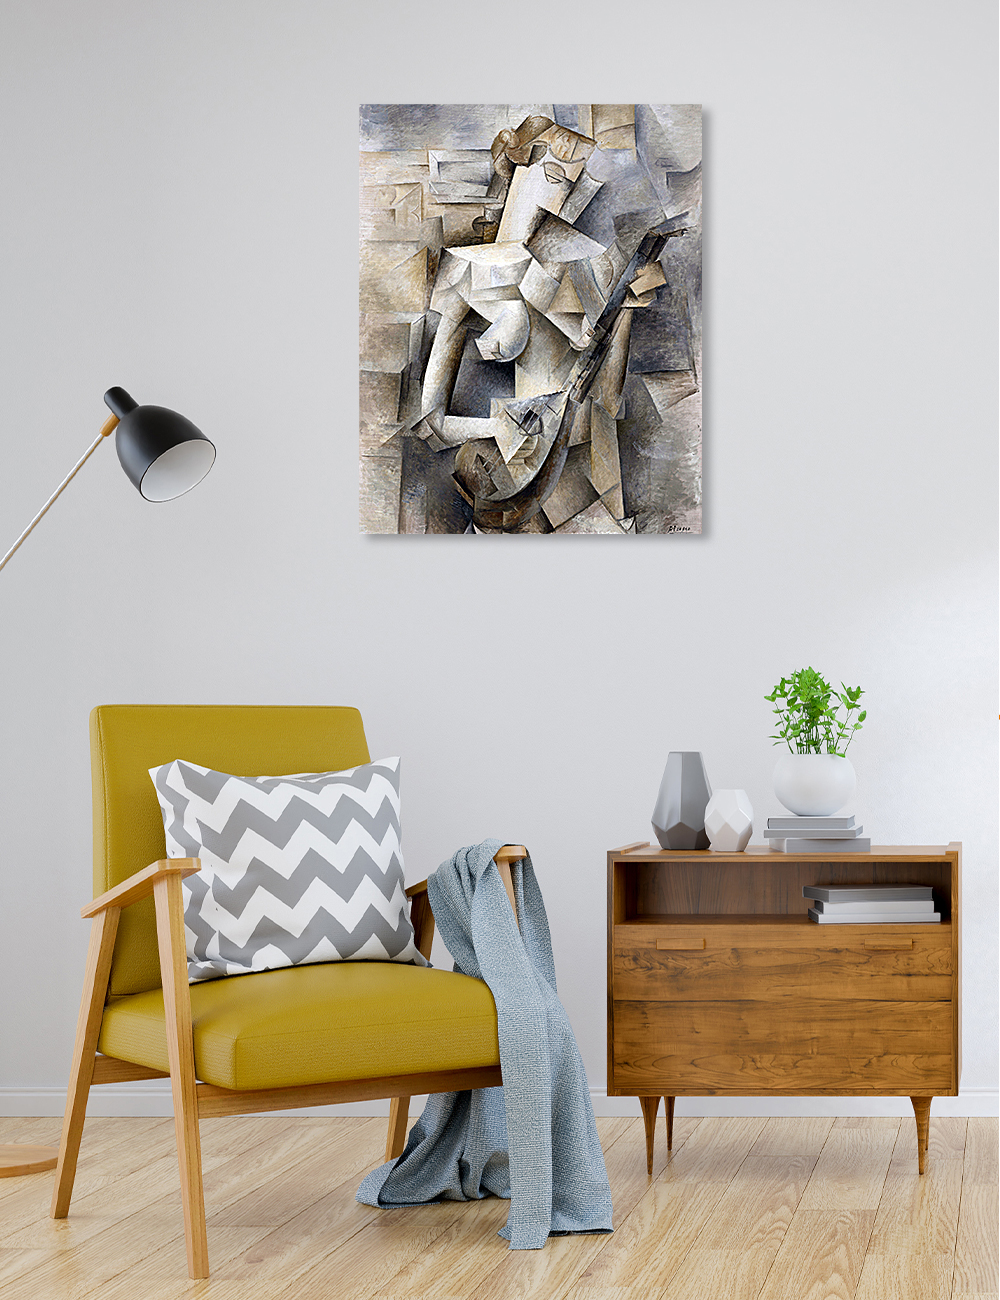 DECORARTS Girl With Mandolin by Pablo Picasso, Giclee Prints on Acid Free  Cotton Canvas Wall Art for Home Decor W 16